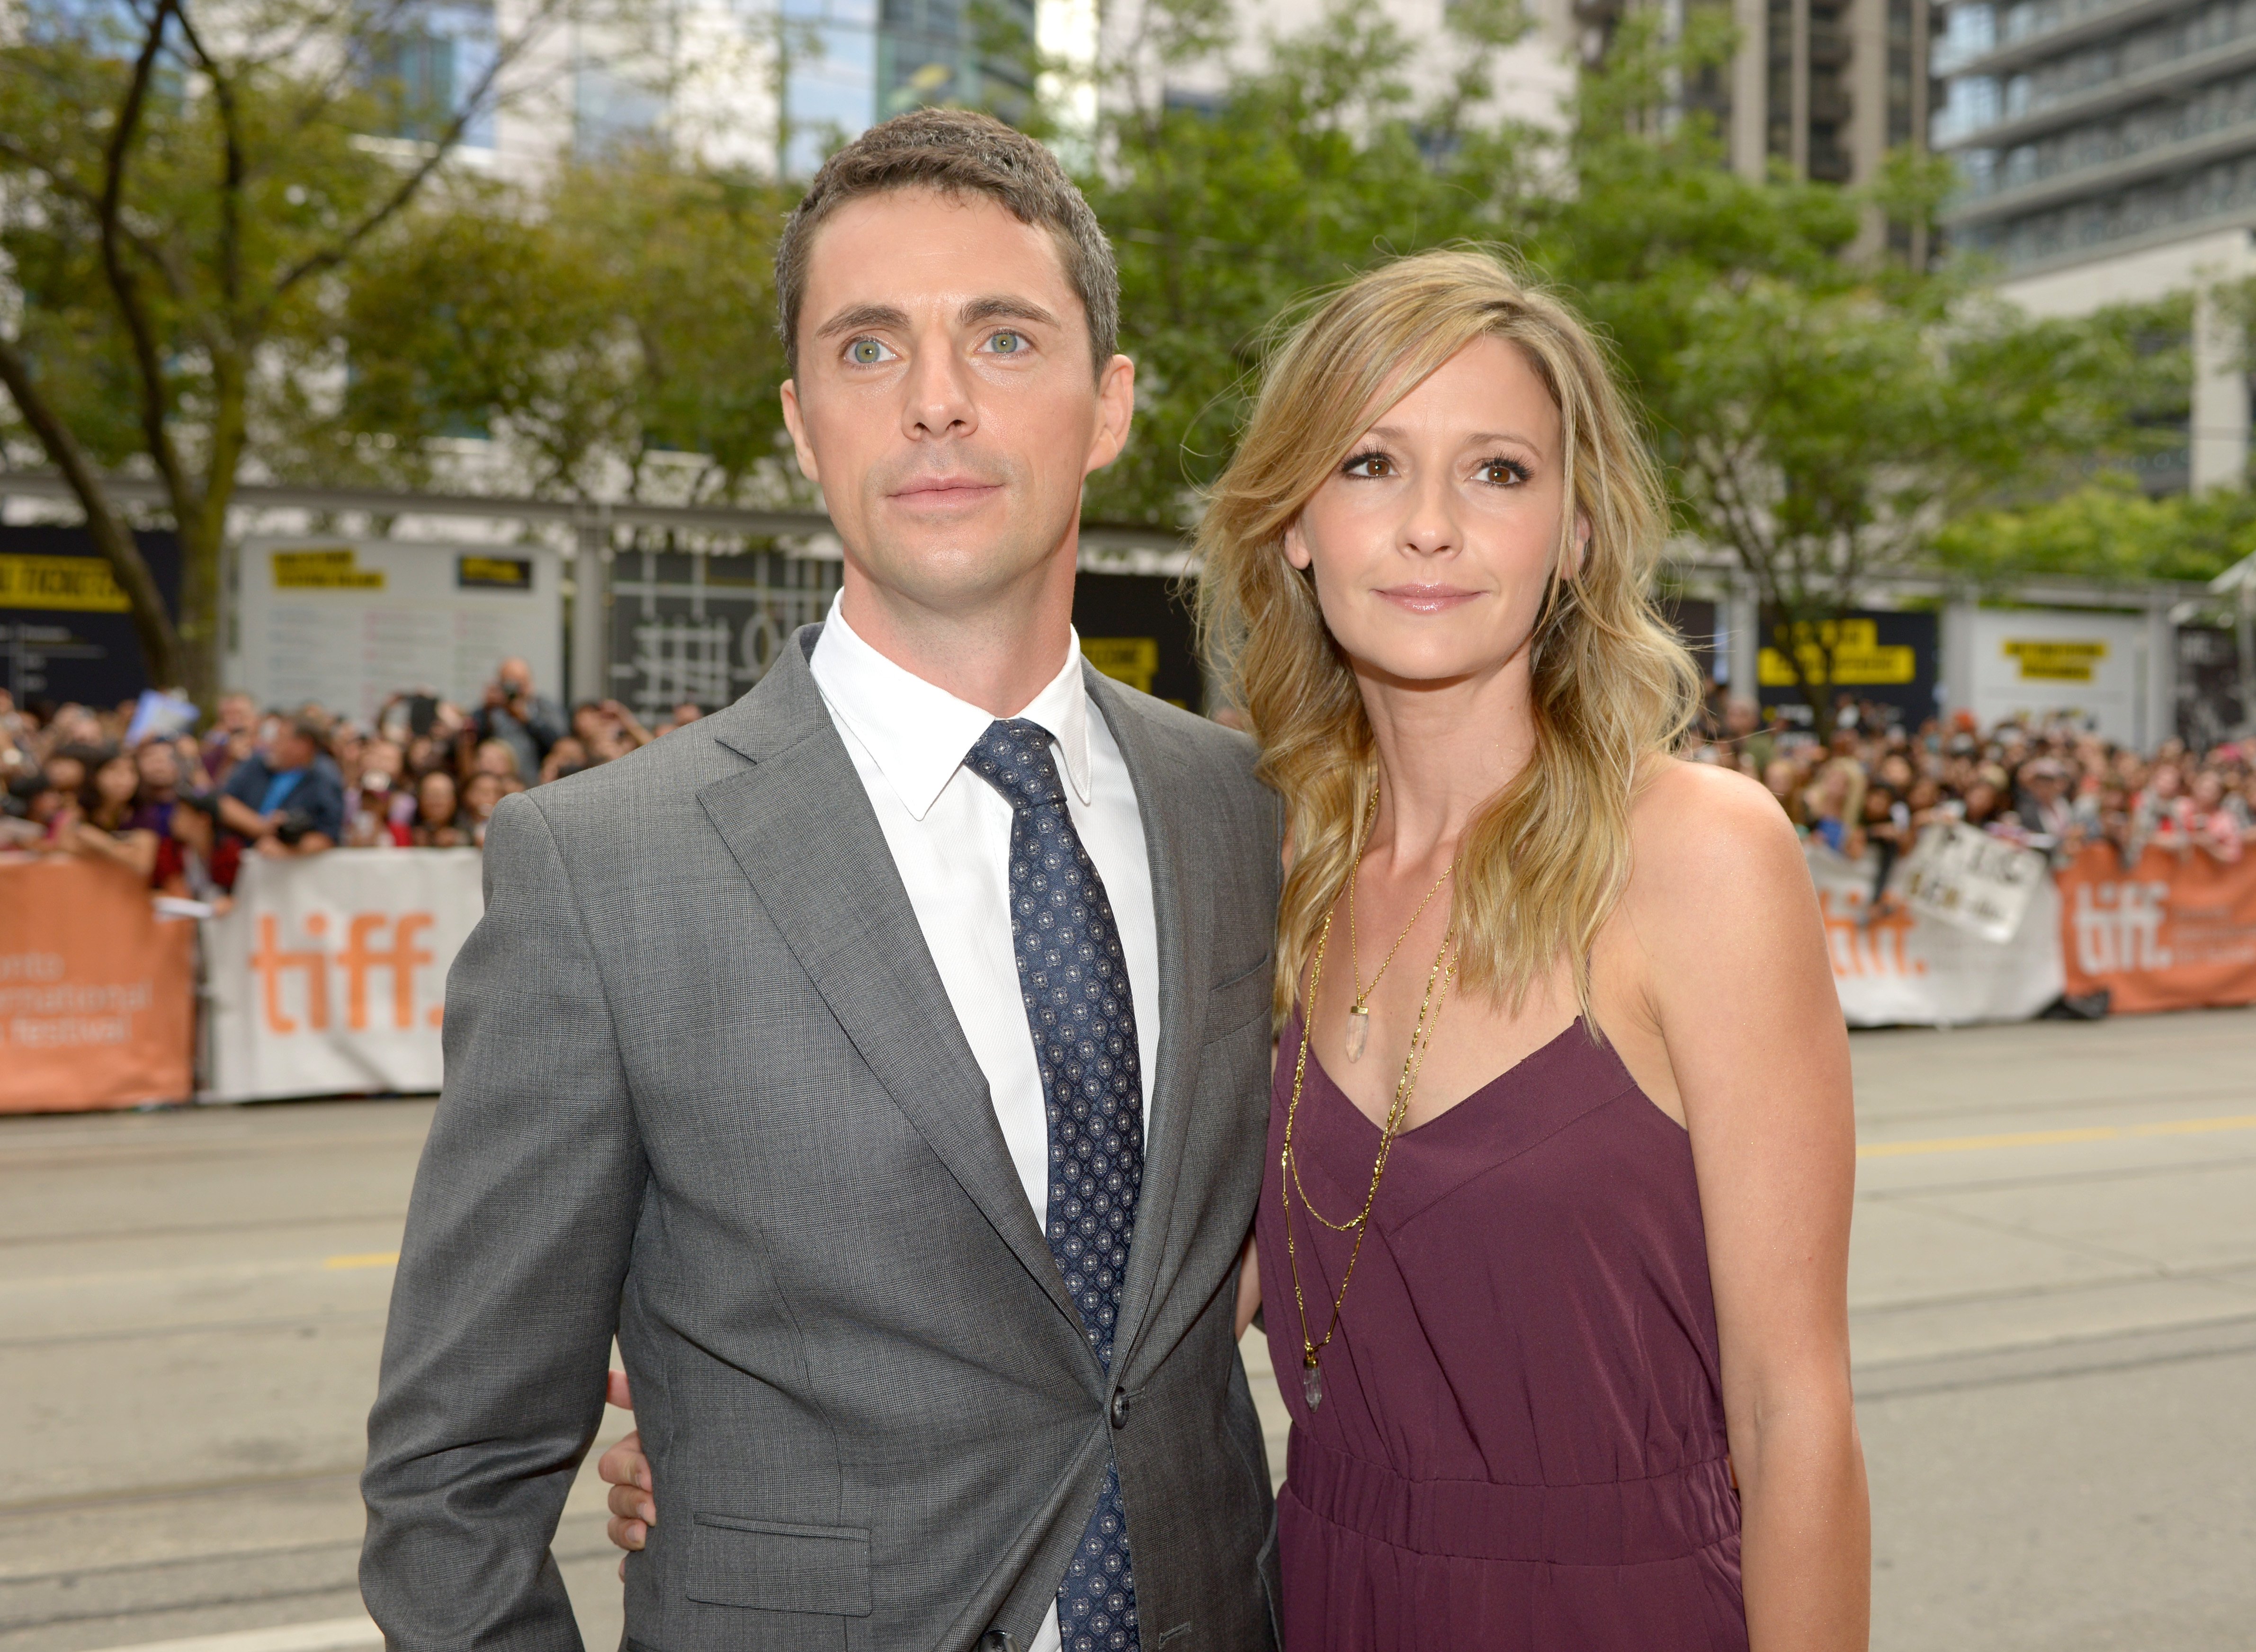 Actor Matthew Goode and Sophie Dymoke attend the "The Imitation Game" premiere during the 2014 Toronto International Film Festival at Princess of Wales Theatre on September 9, 2014, in Toronto, Canada.  | Source: Getty Images